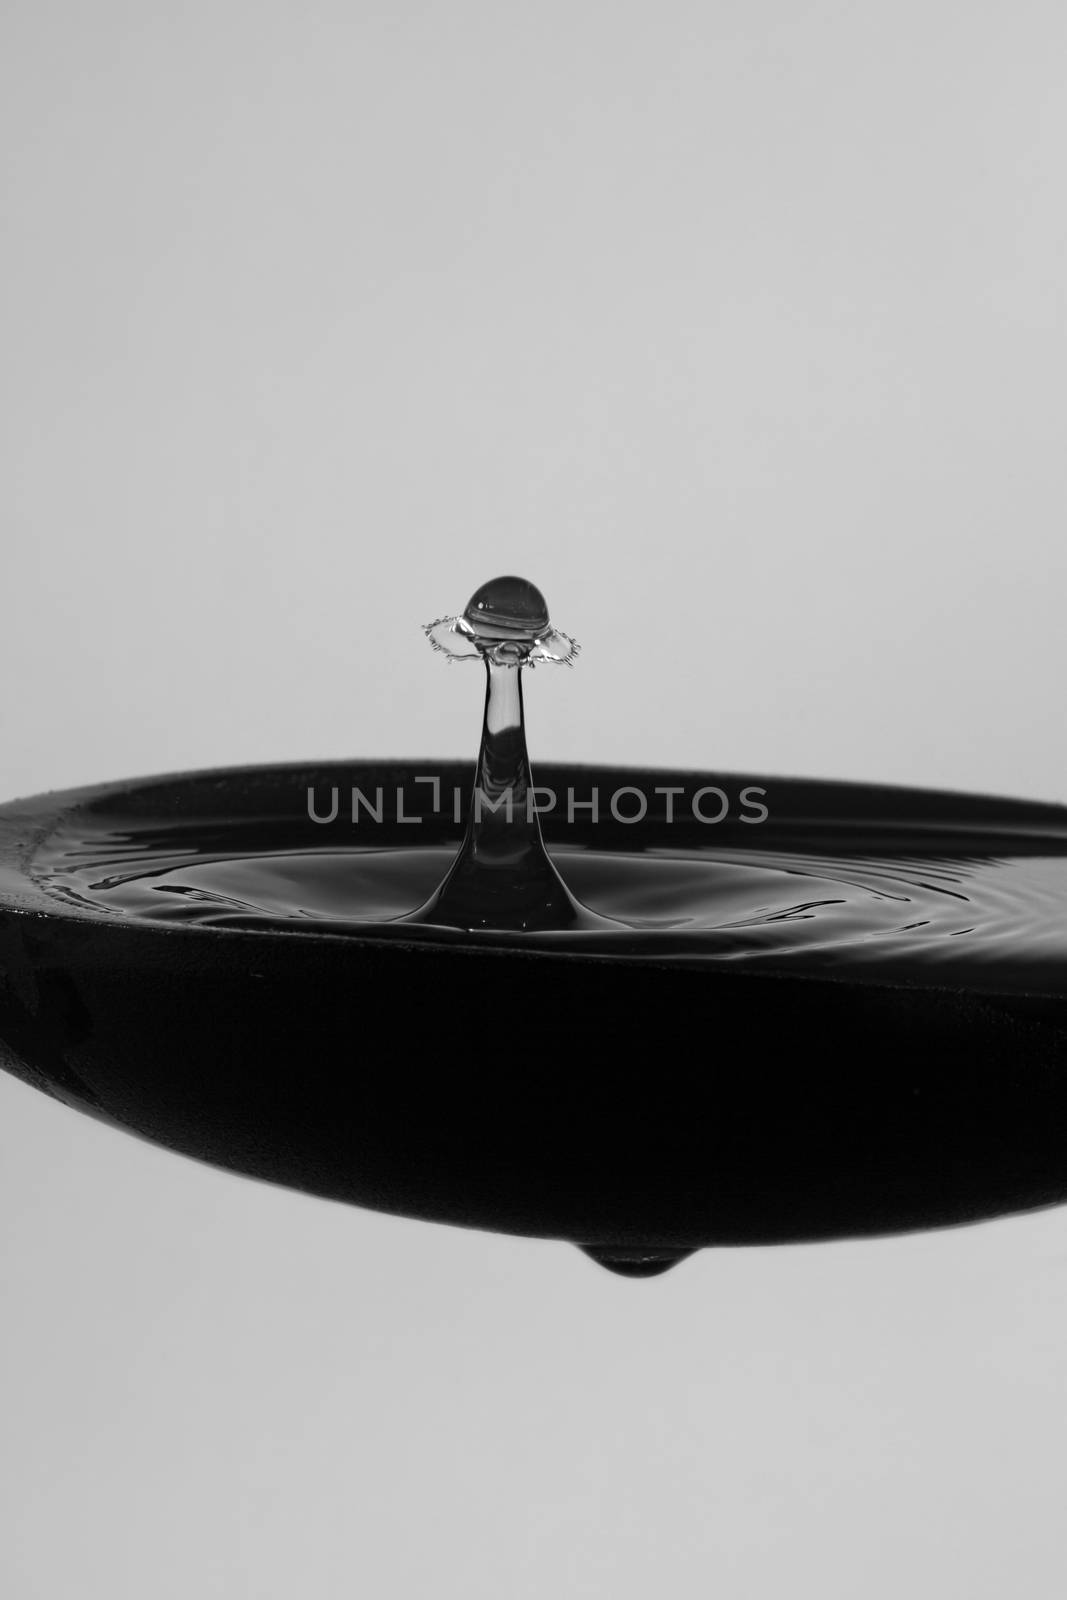 Water drops splash and collide to form an umbrella shape in a soup spoon, monotone flash photography